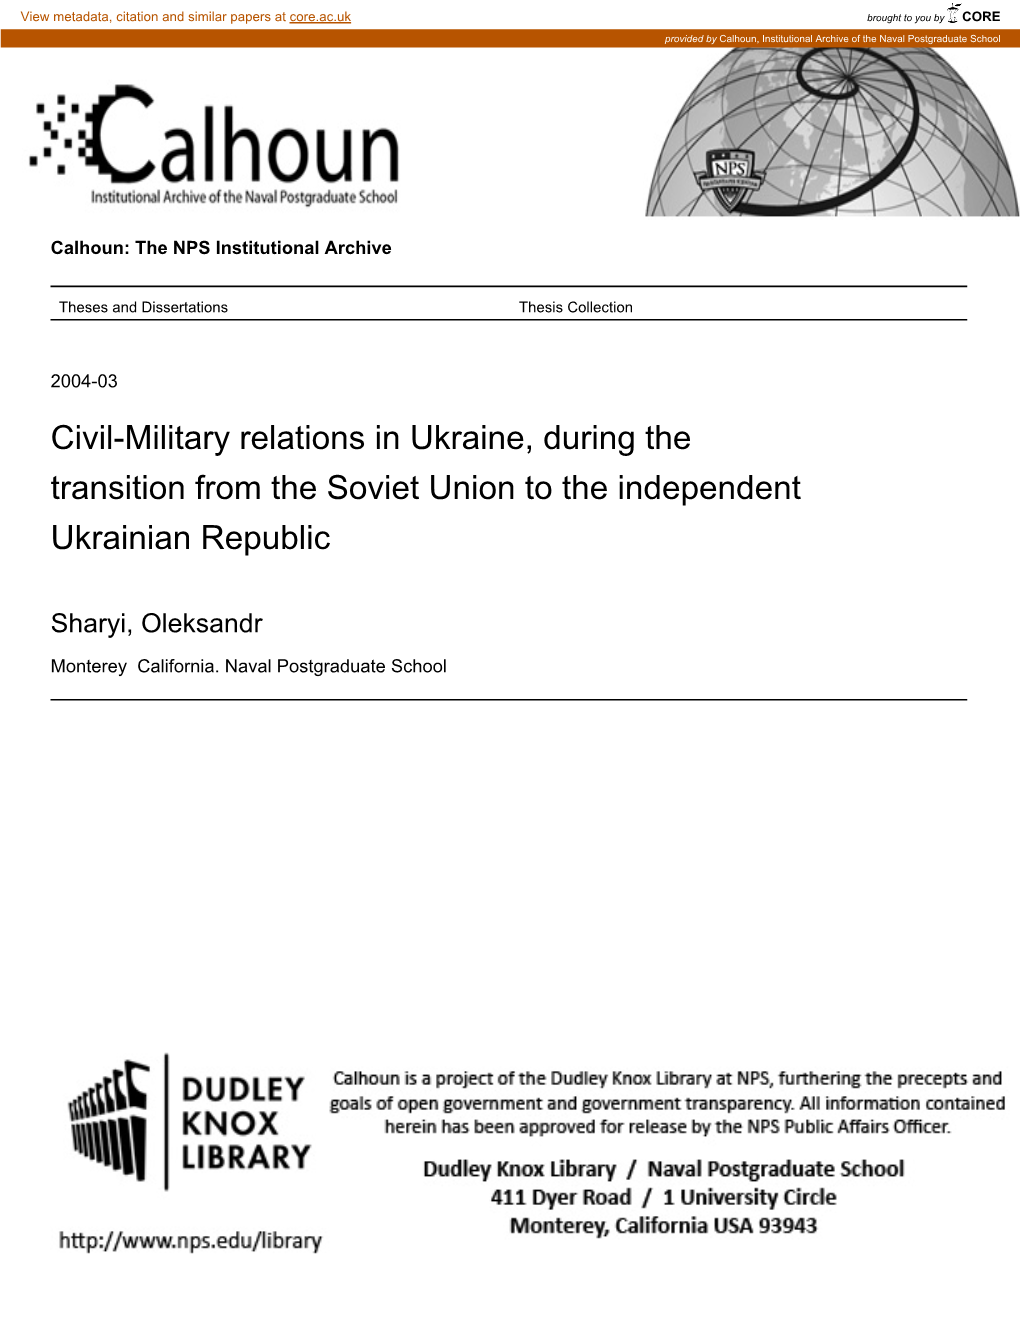 Civil-Military Relations in Ukraine, During the Transition from the Soviet Union to the Independent Ukrainian Republic